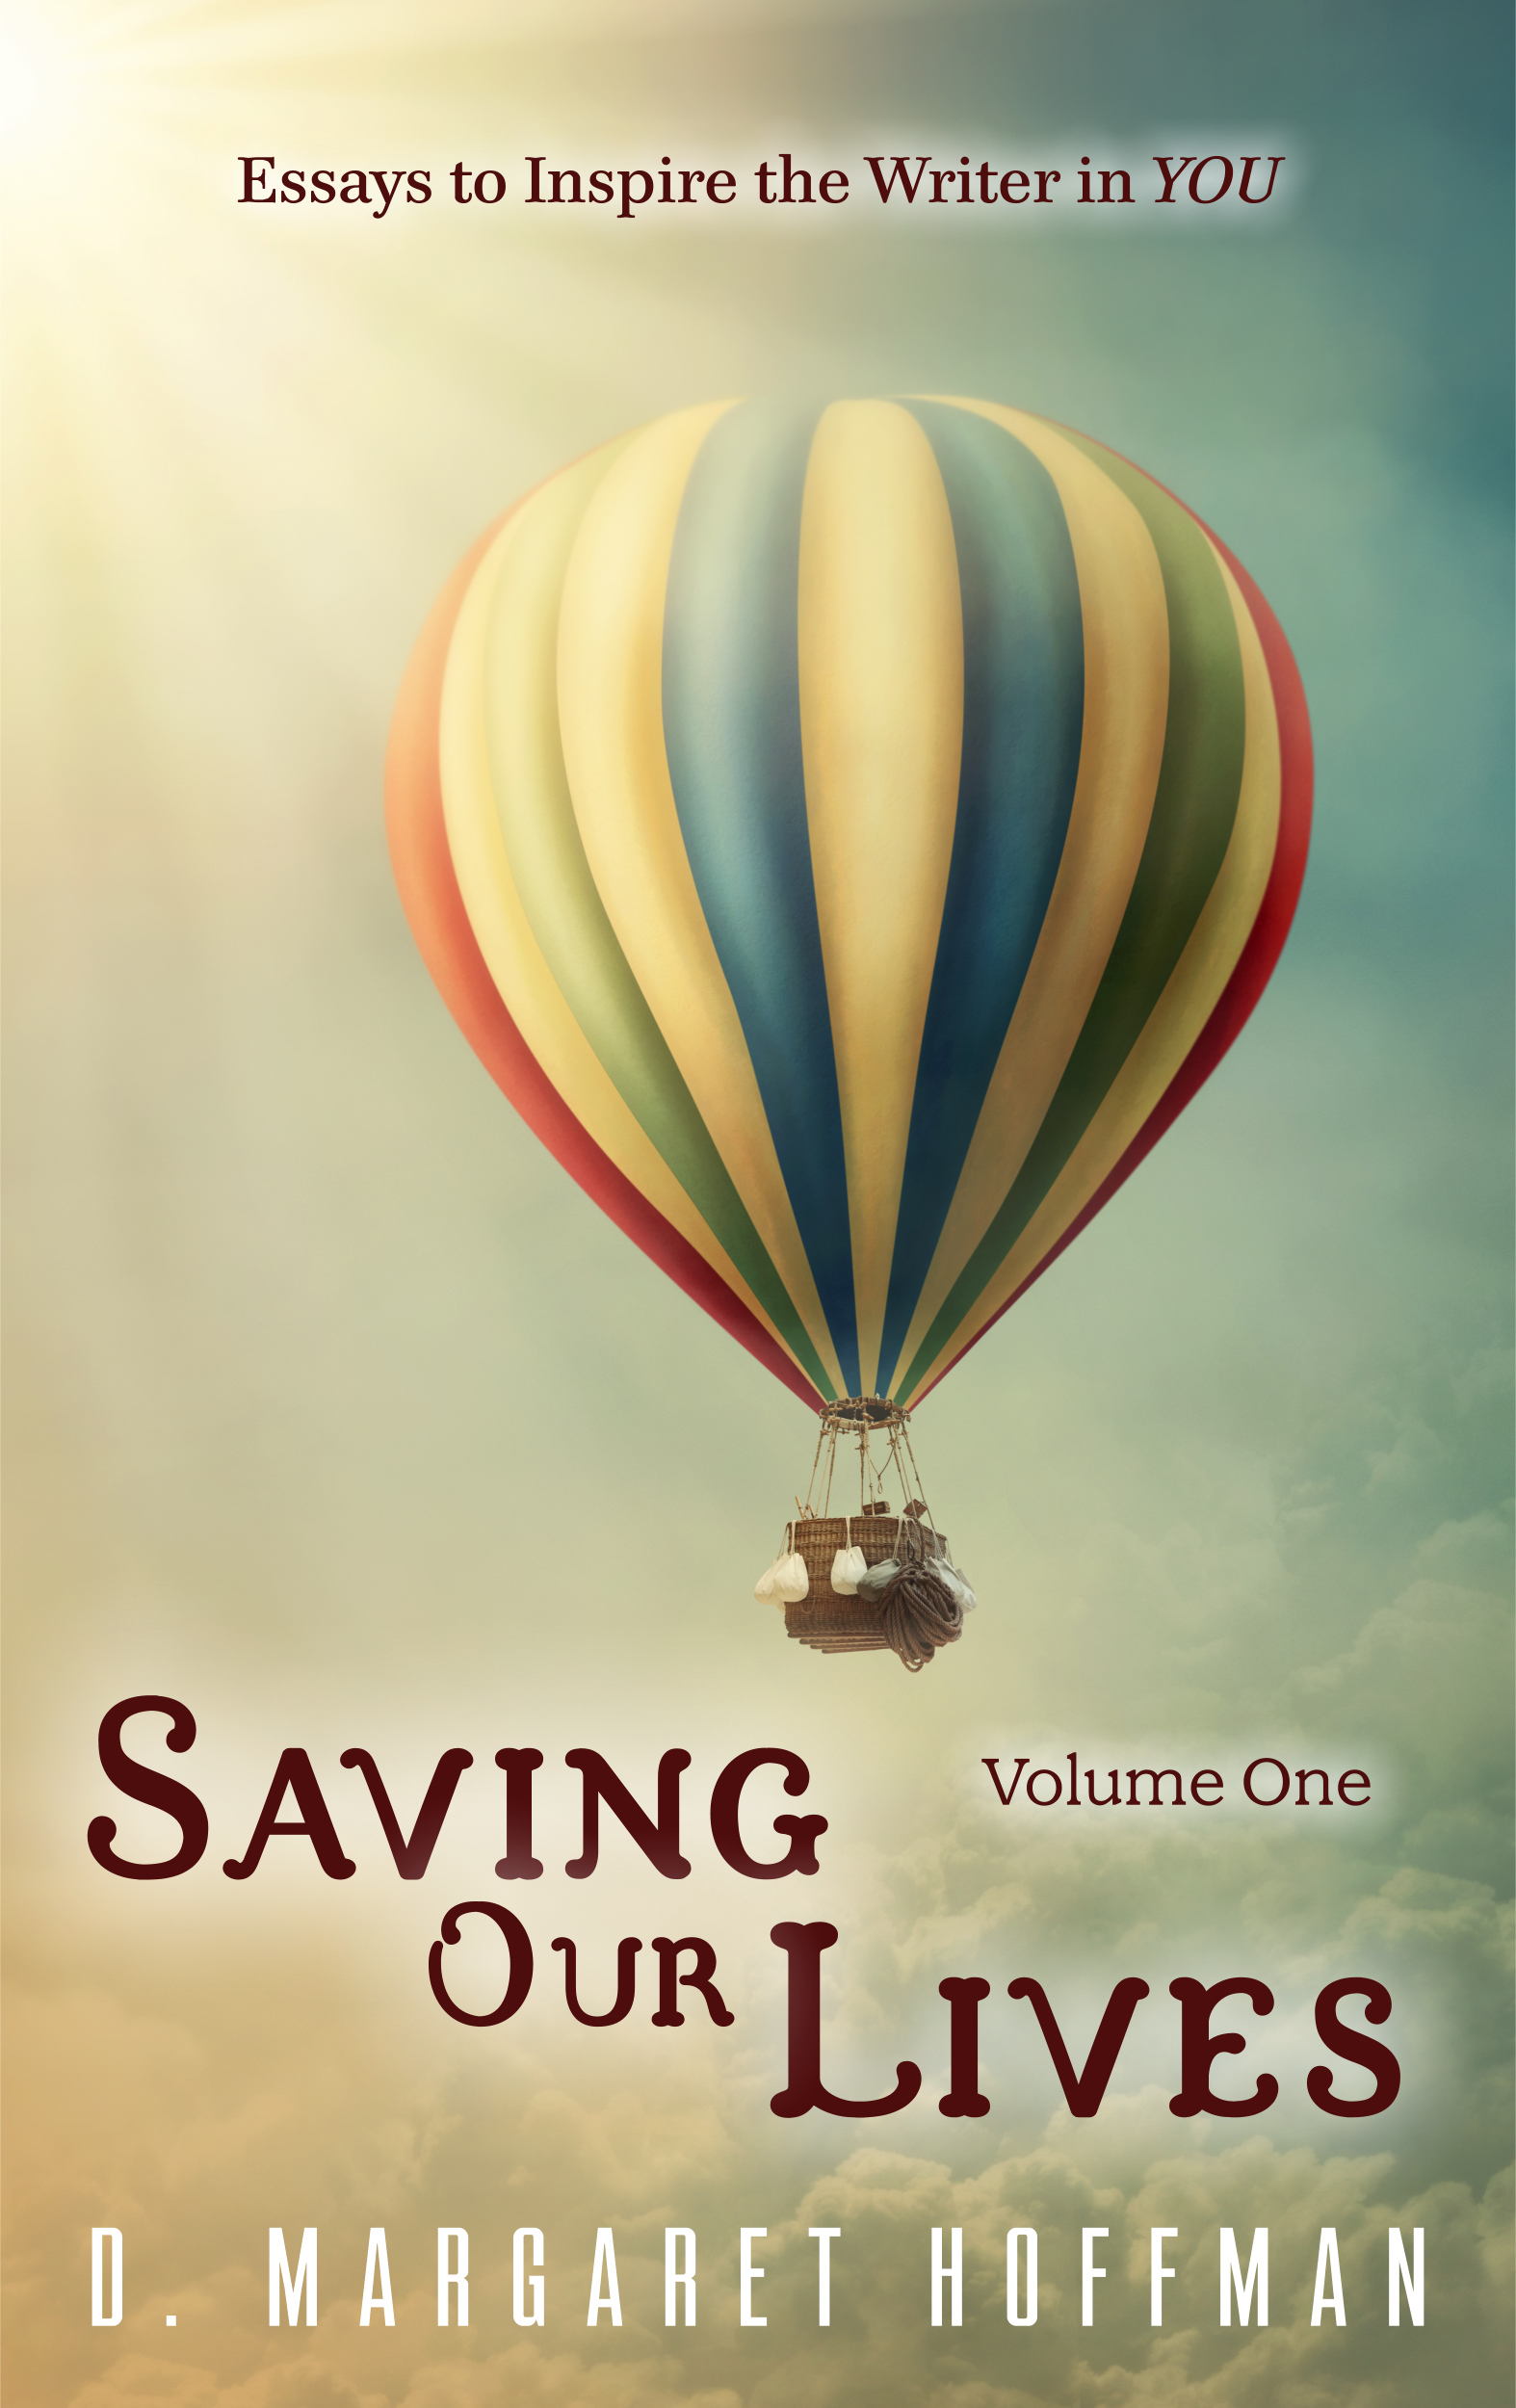 Buy Saving Our Lives volume 1 at Amazon